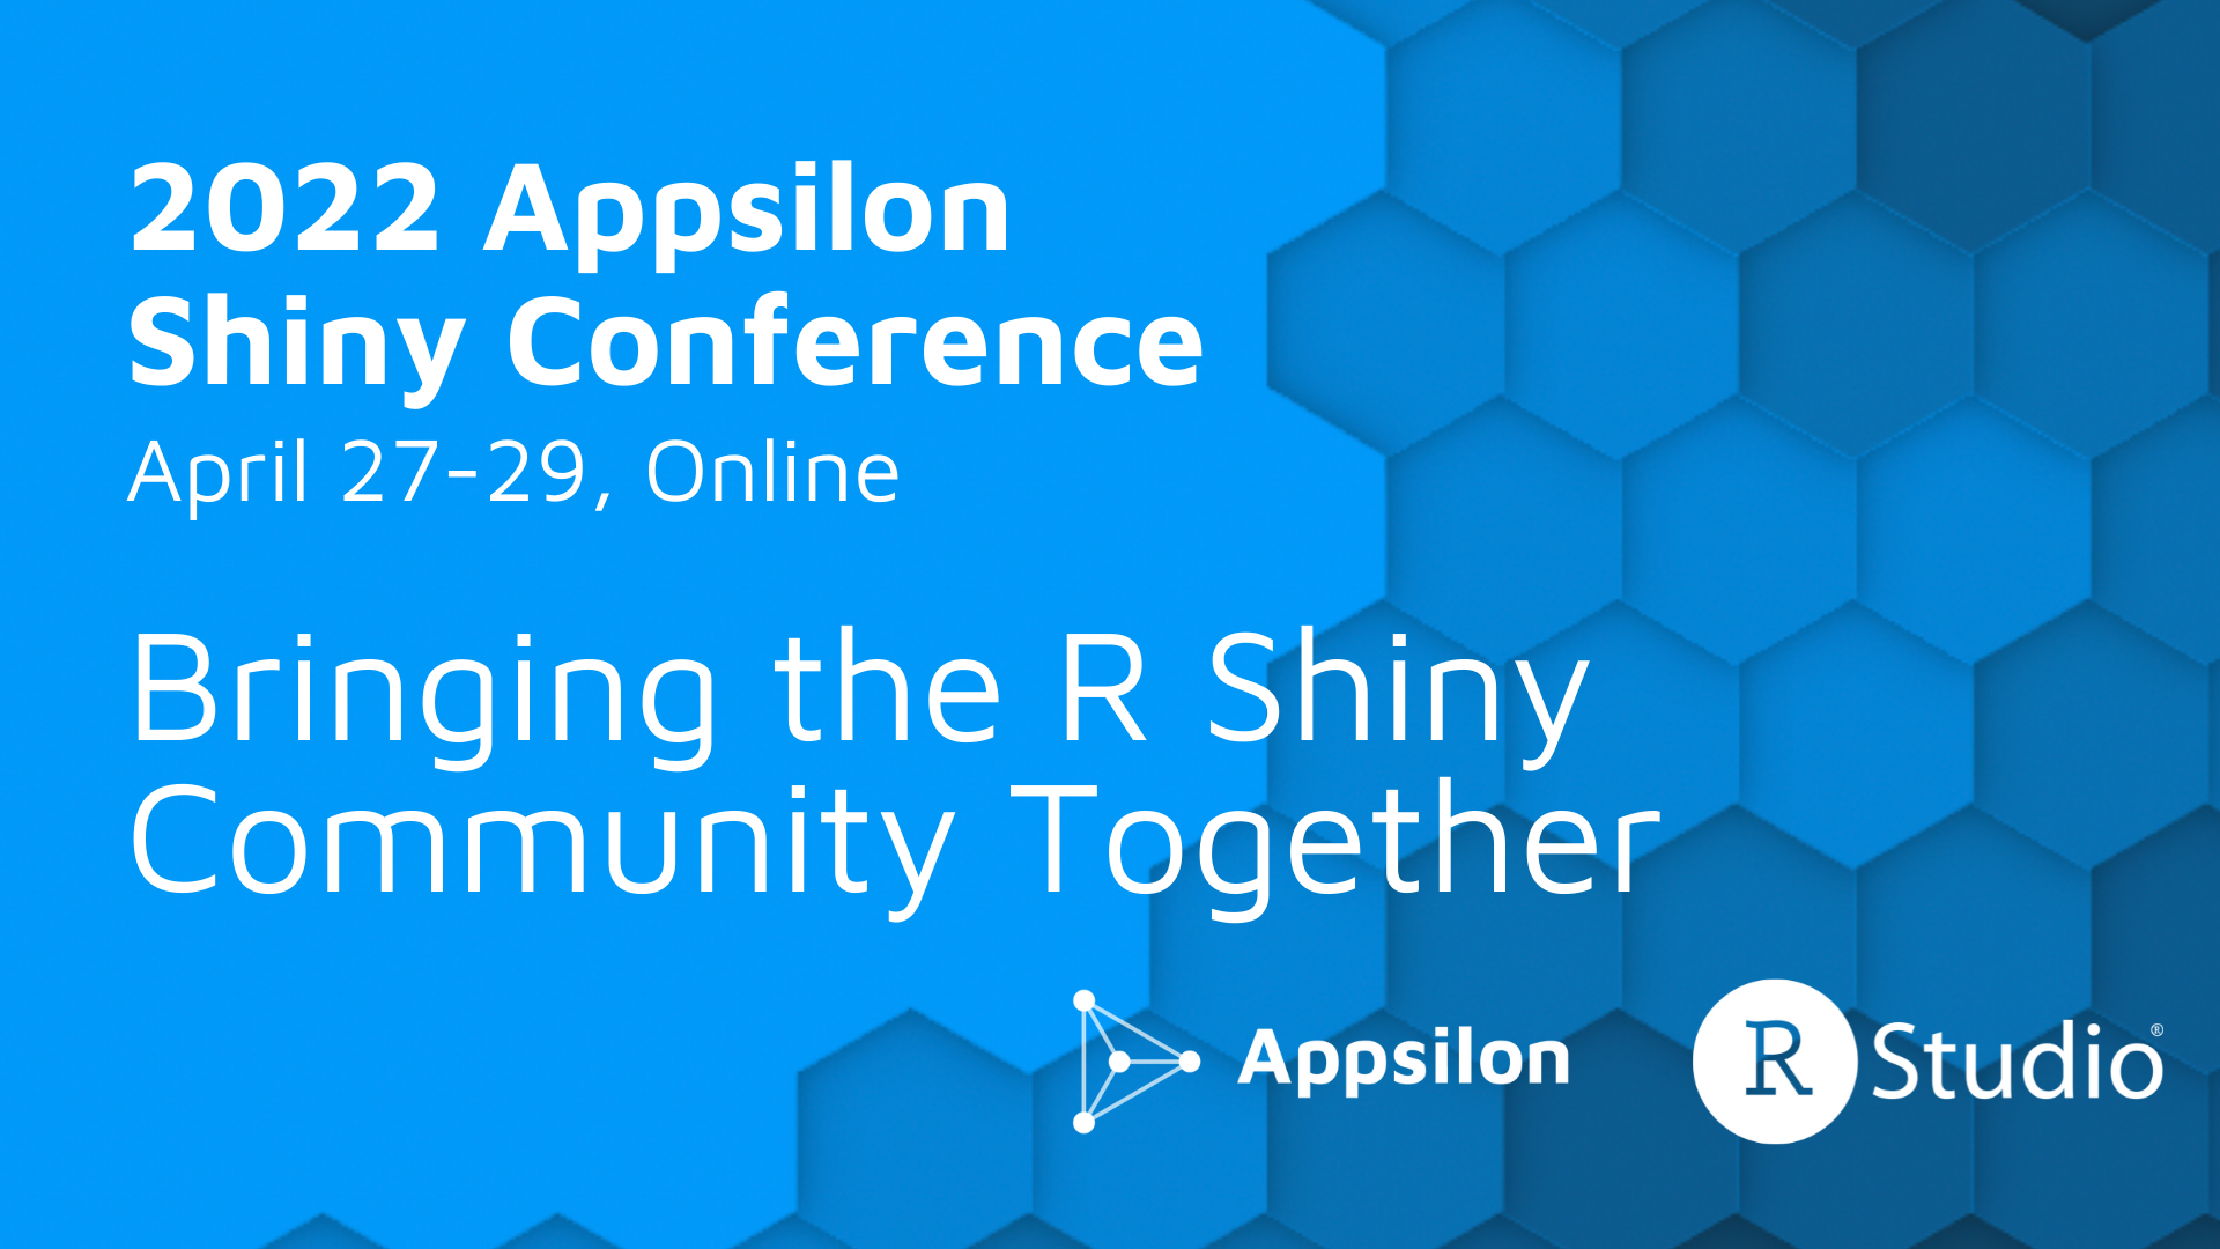 Thumbnail Logo for the Appsilon Shiny Conference that say 2022 Appsilon Shiny Conference April 27 through 29 online, bringing the Shiny community together, with the Appsilon and RStudio logo and a blue background with hexagons